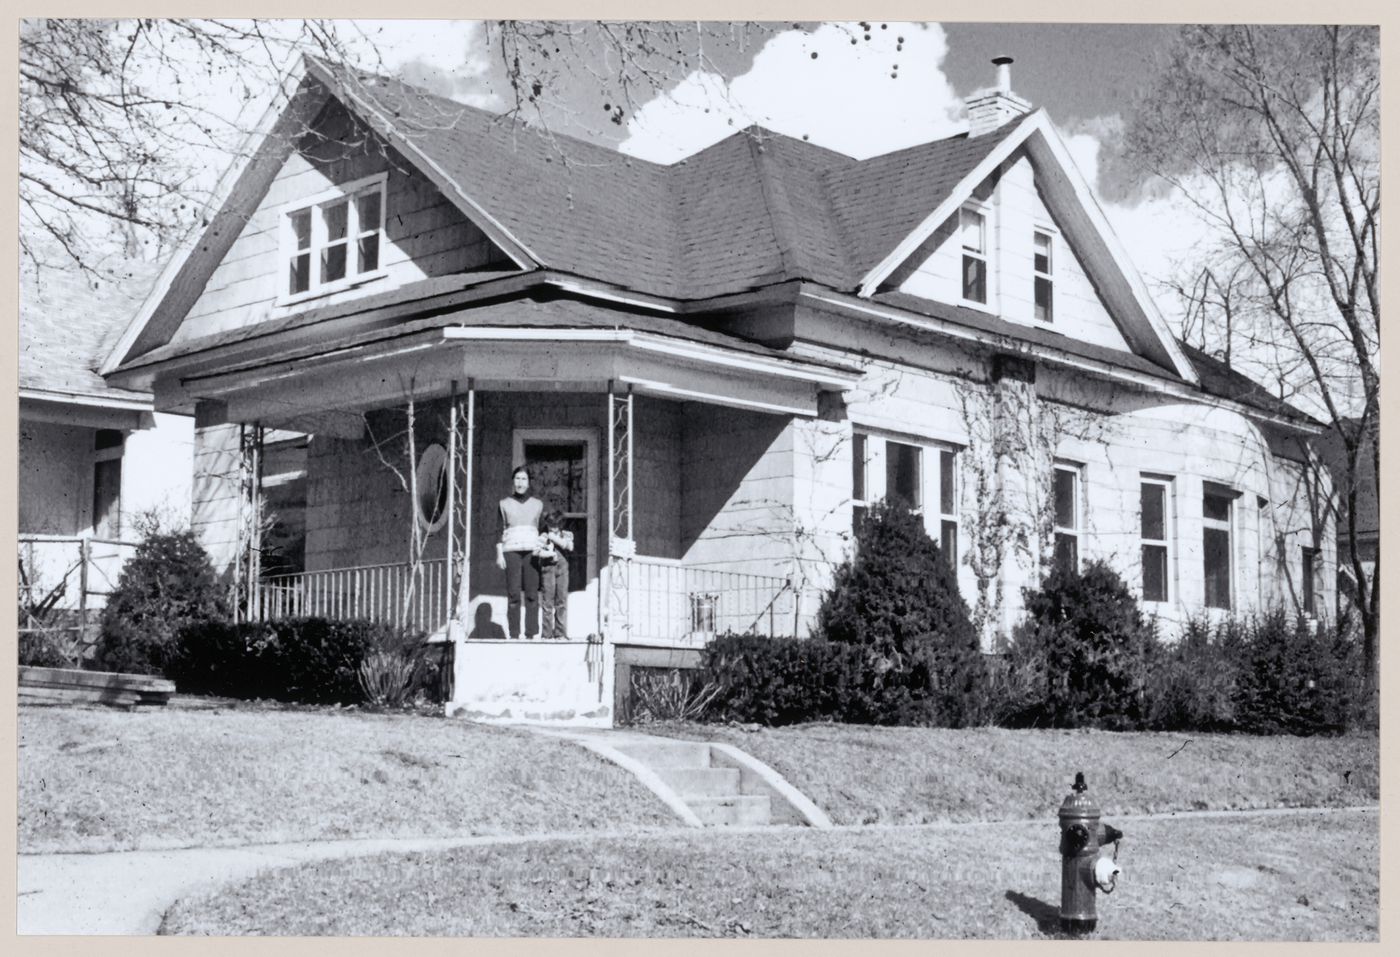 Photograph showing an exterior view of the house used for Clay House prior to being covered in clay along with an adult and a child standing in the house's doorway